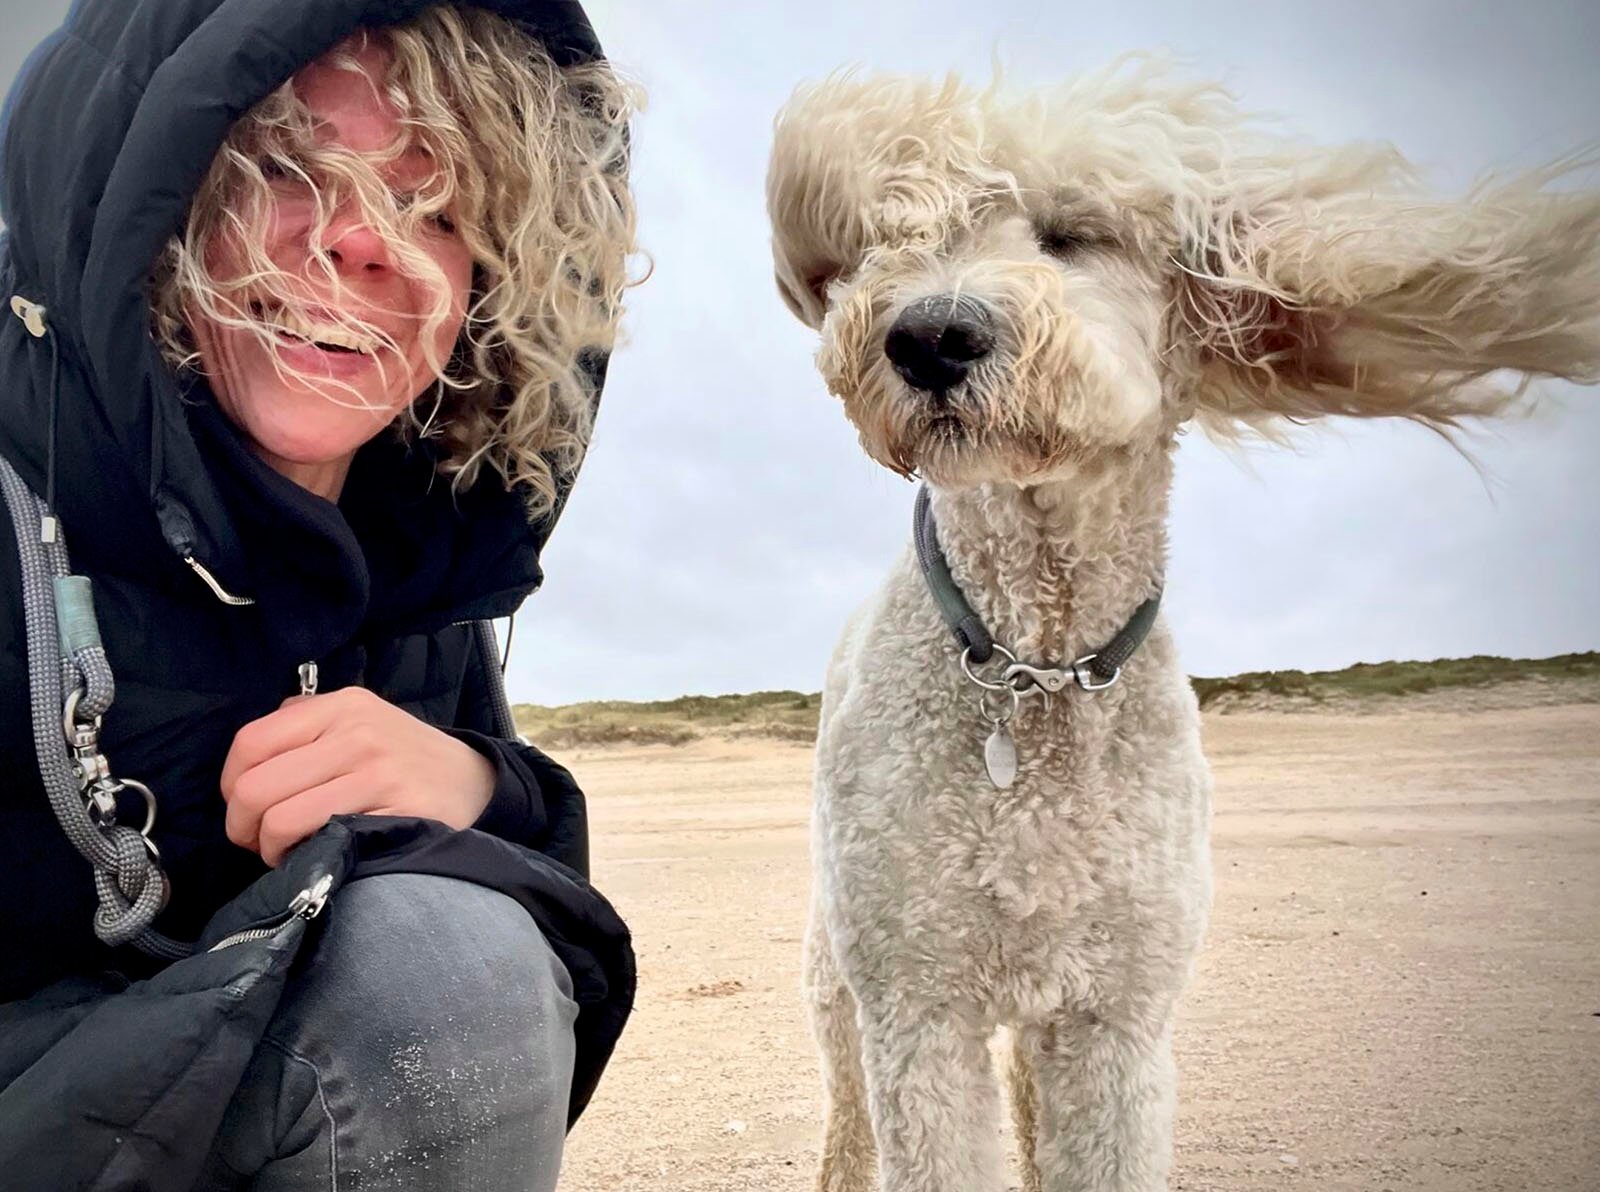 A joyful moment on a windy beach with a woman and a fluffy dog, both with hair blown by the wind, smiling and enjoying the breezy weather together.